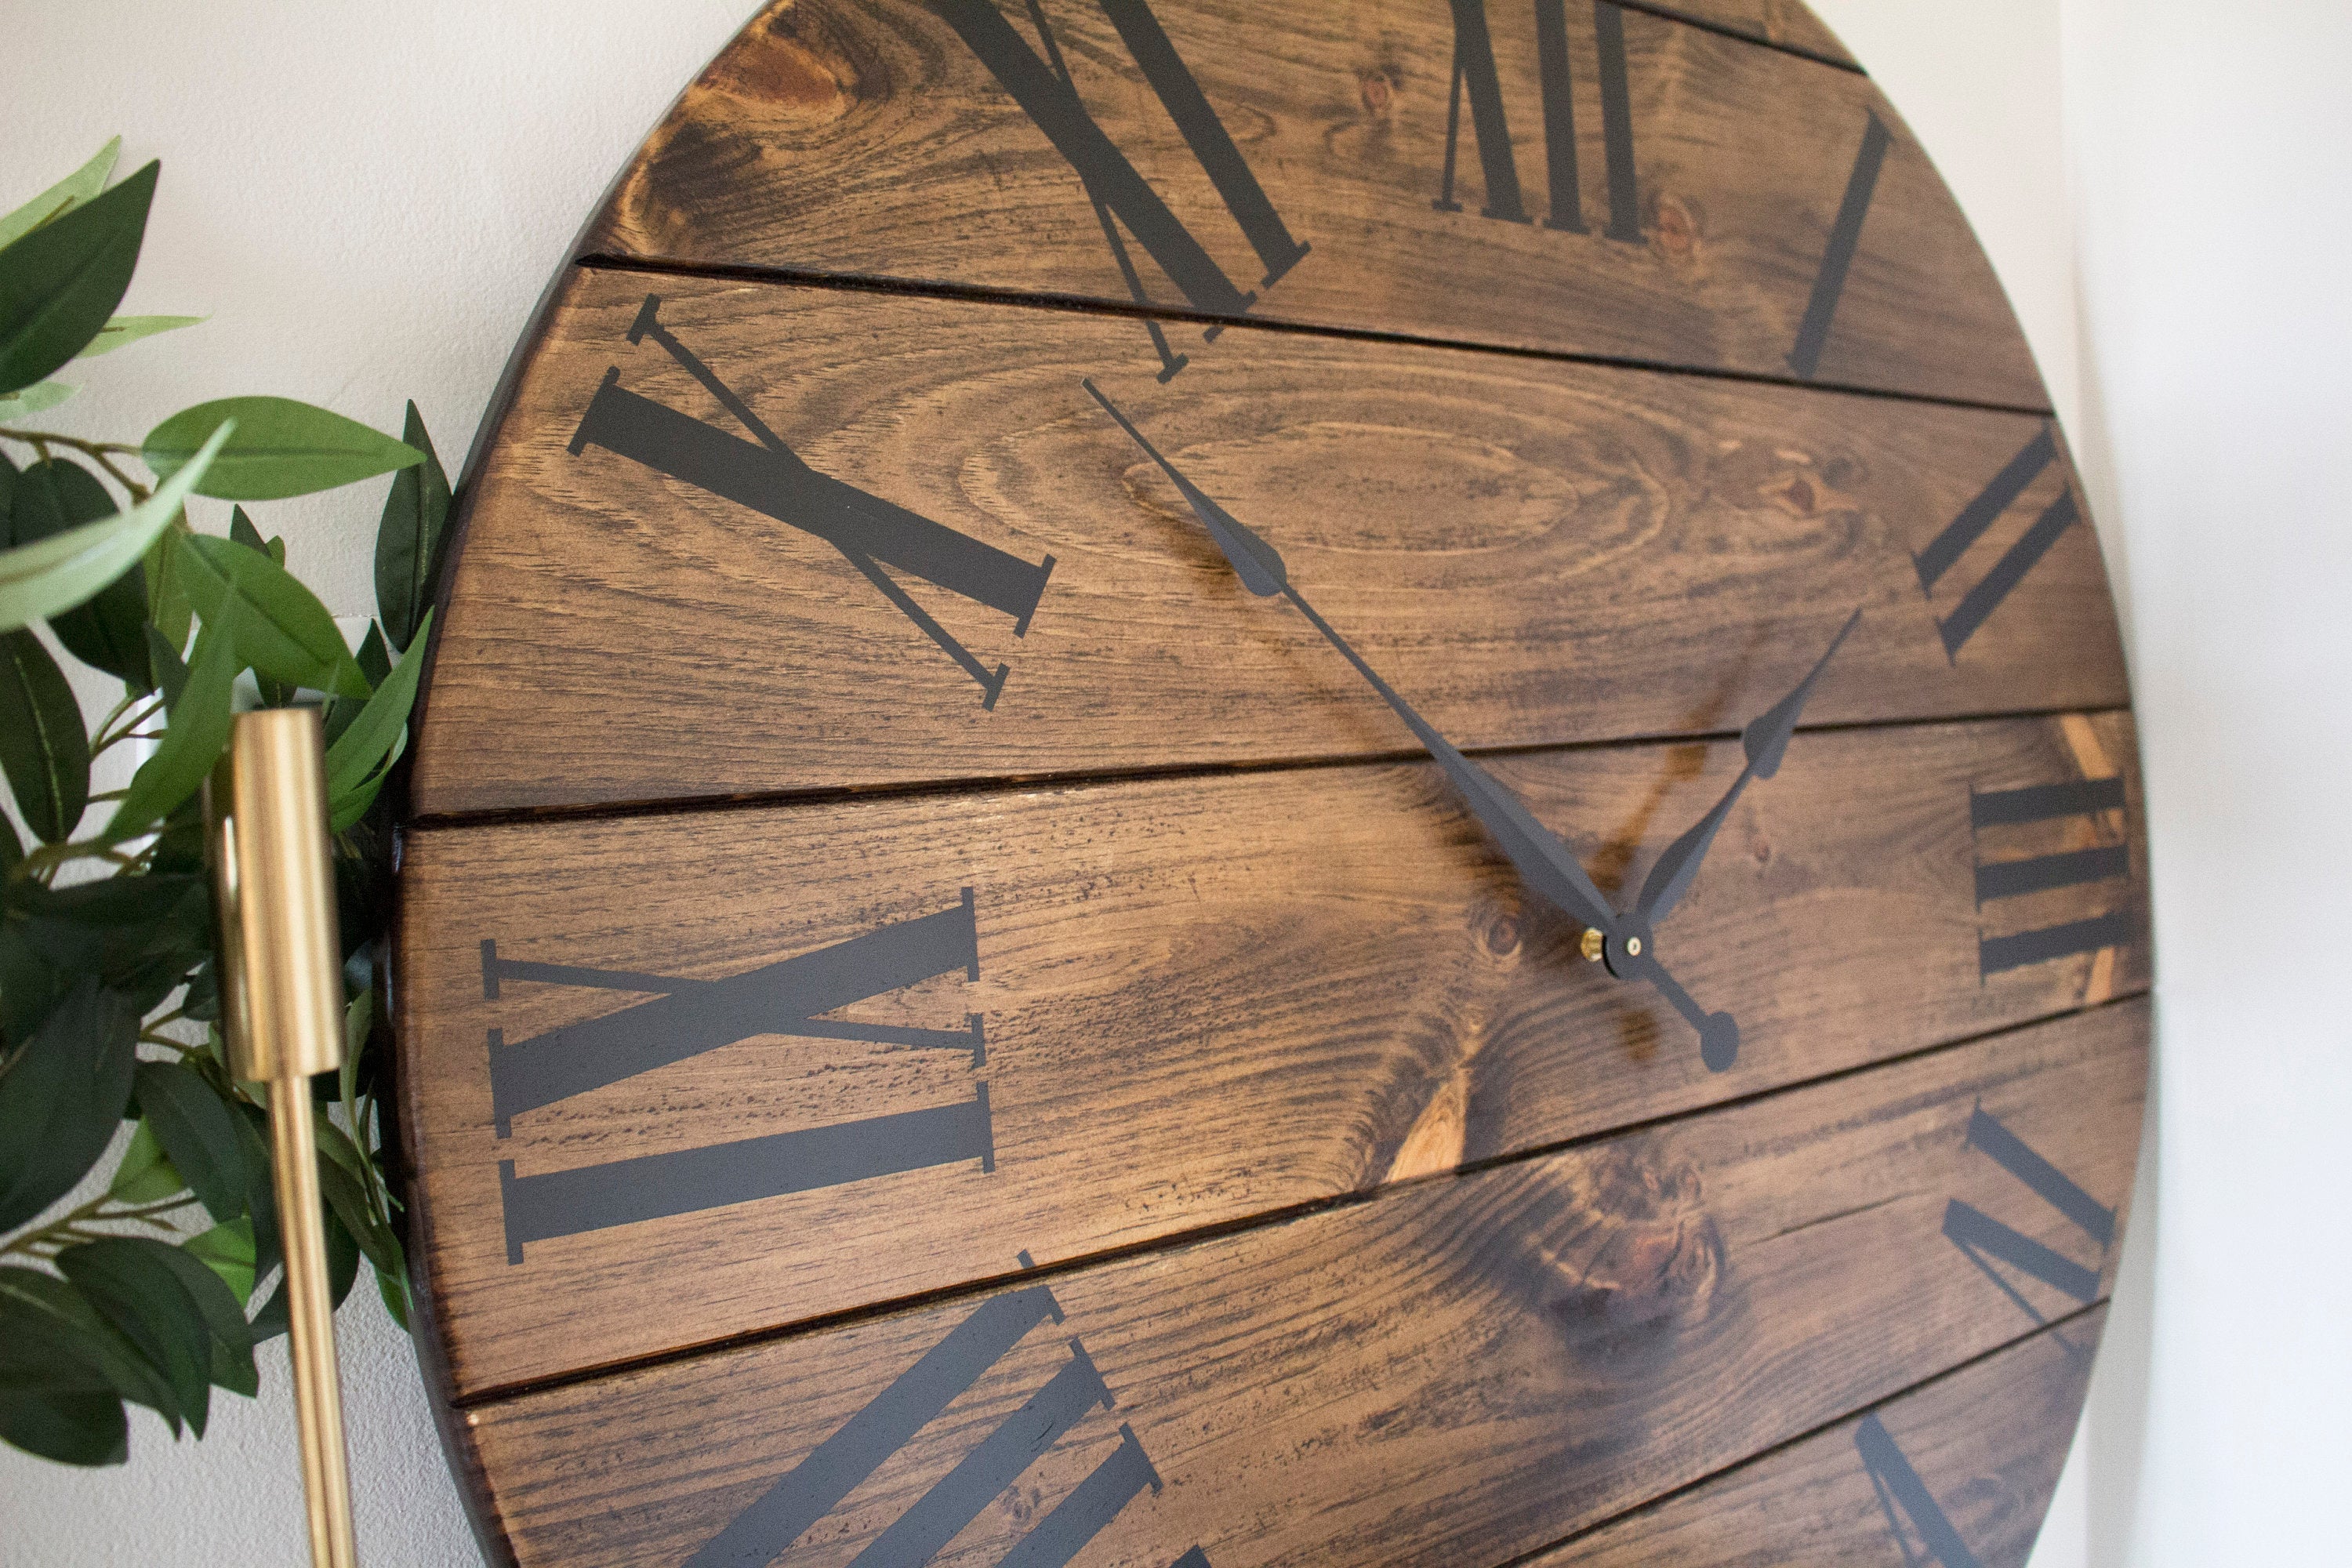 Dark Stained Large Farmhouse Wall Clock with Black Roman Numerals Handmade Furniture in Iowa, USA